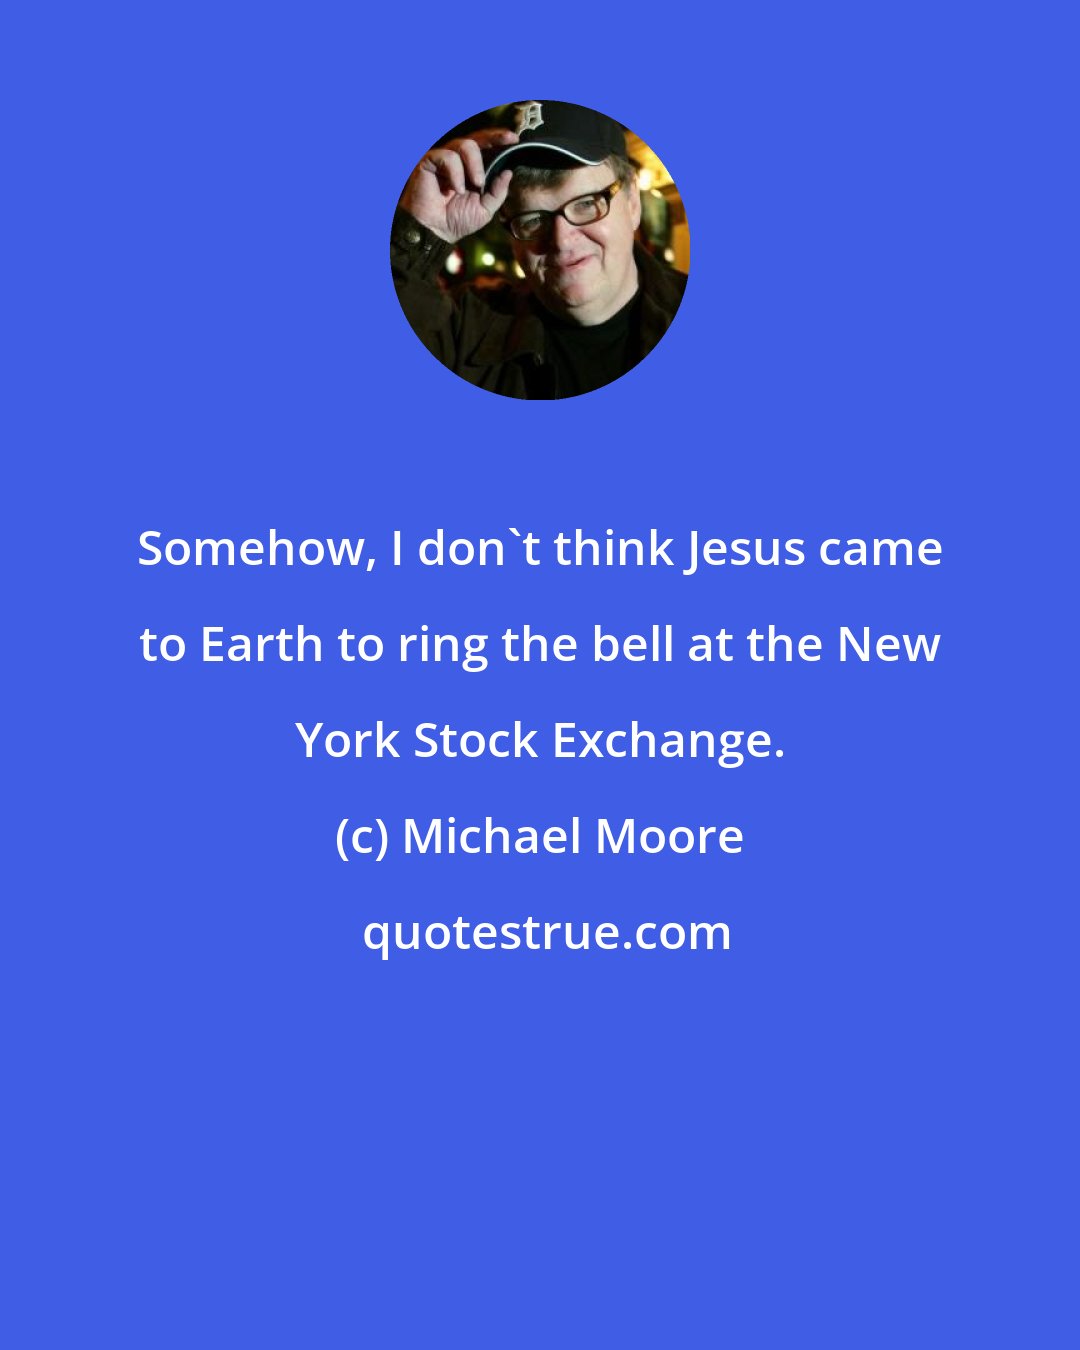 Michael Moore: Somehow, I don't think Jesus came to Earth to ring the bell at the New York Stock Exchange.